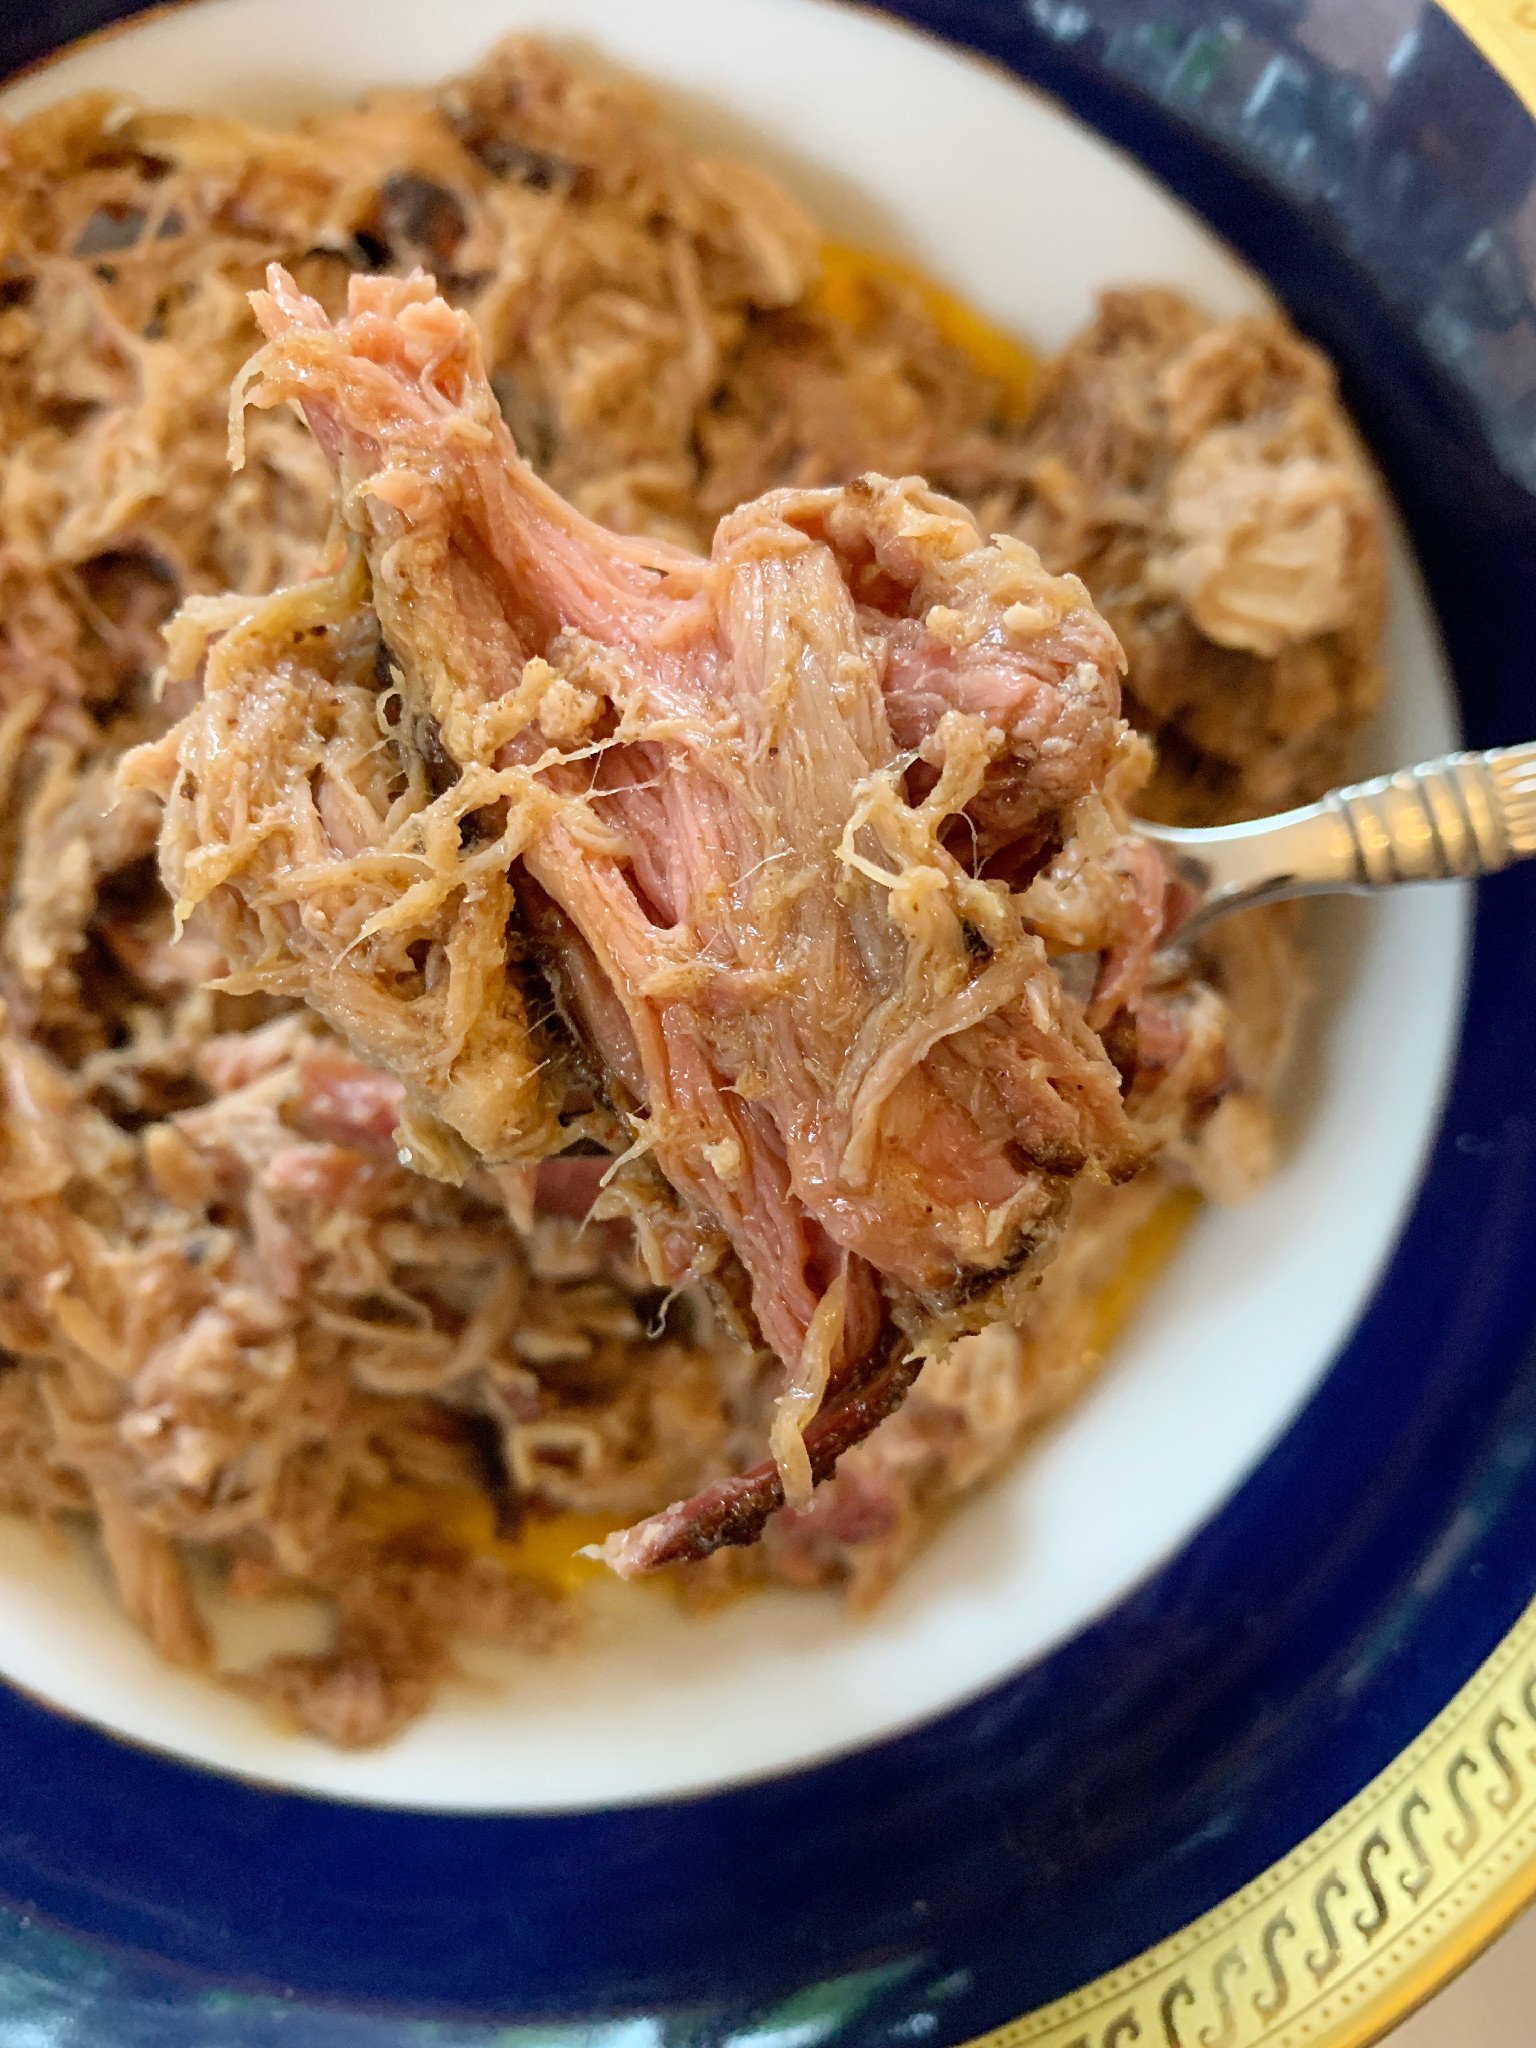 bowl of pulled pork from sweets and meats